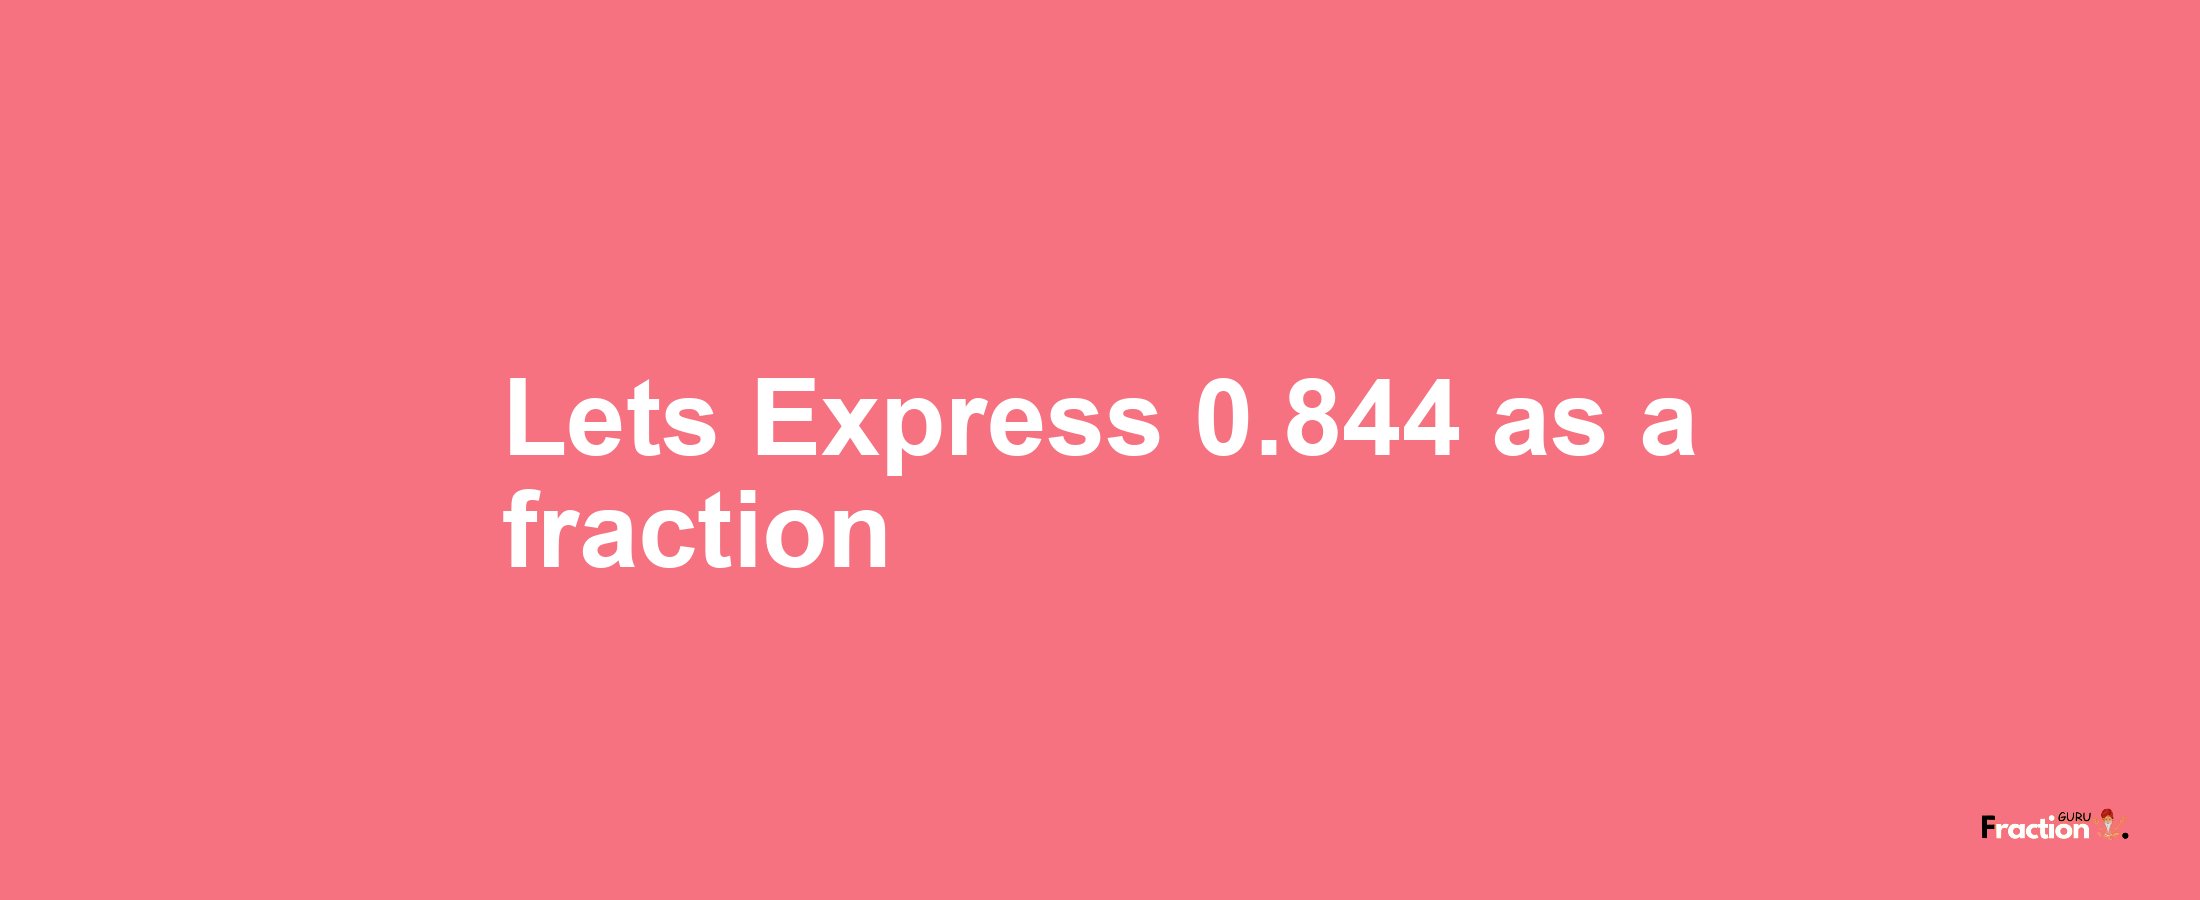 Lets Express 0.844 as afraction